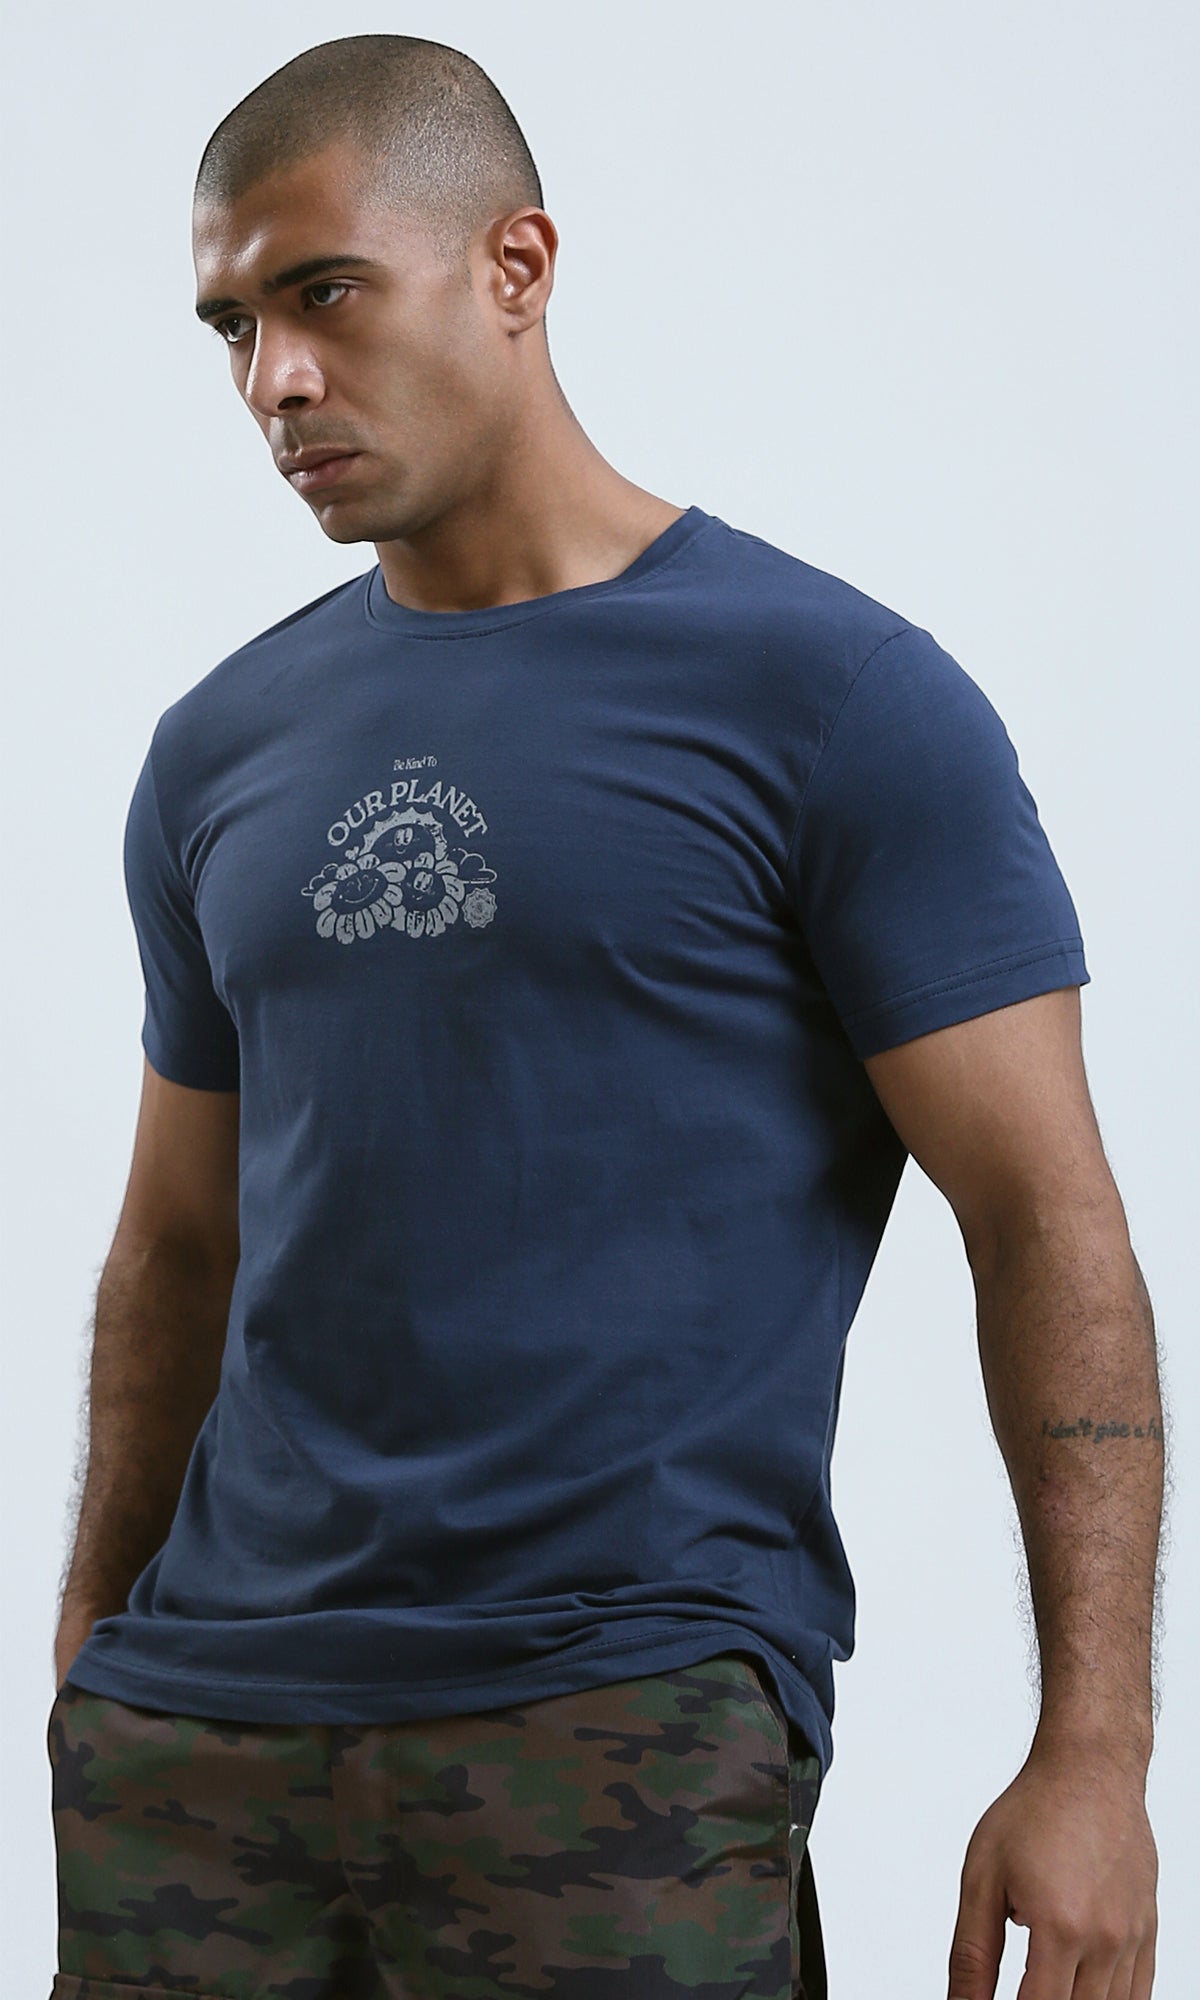 O179009 Navy Blue Printed "Our Planet" Short Sleeves